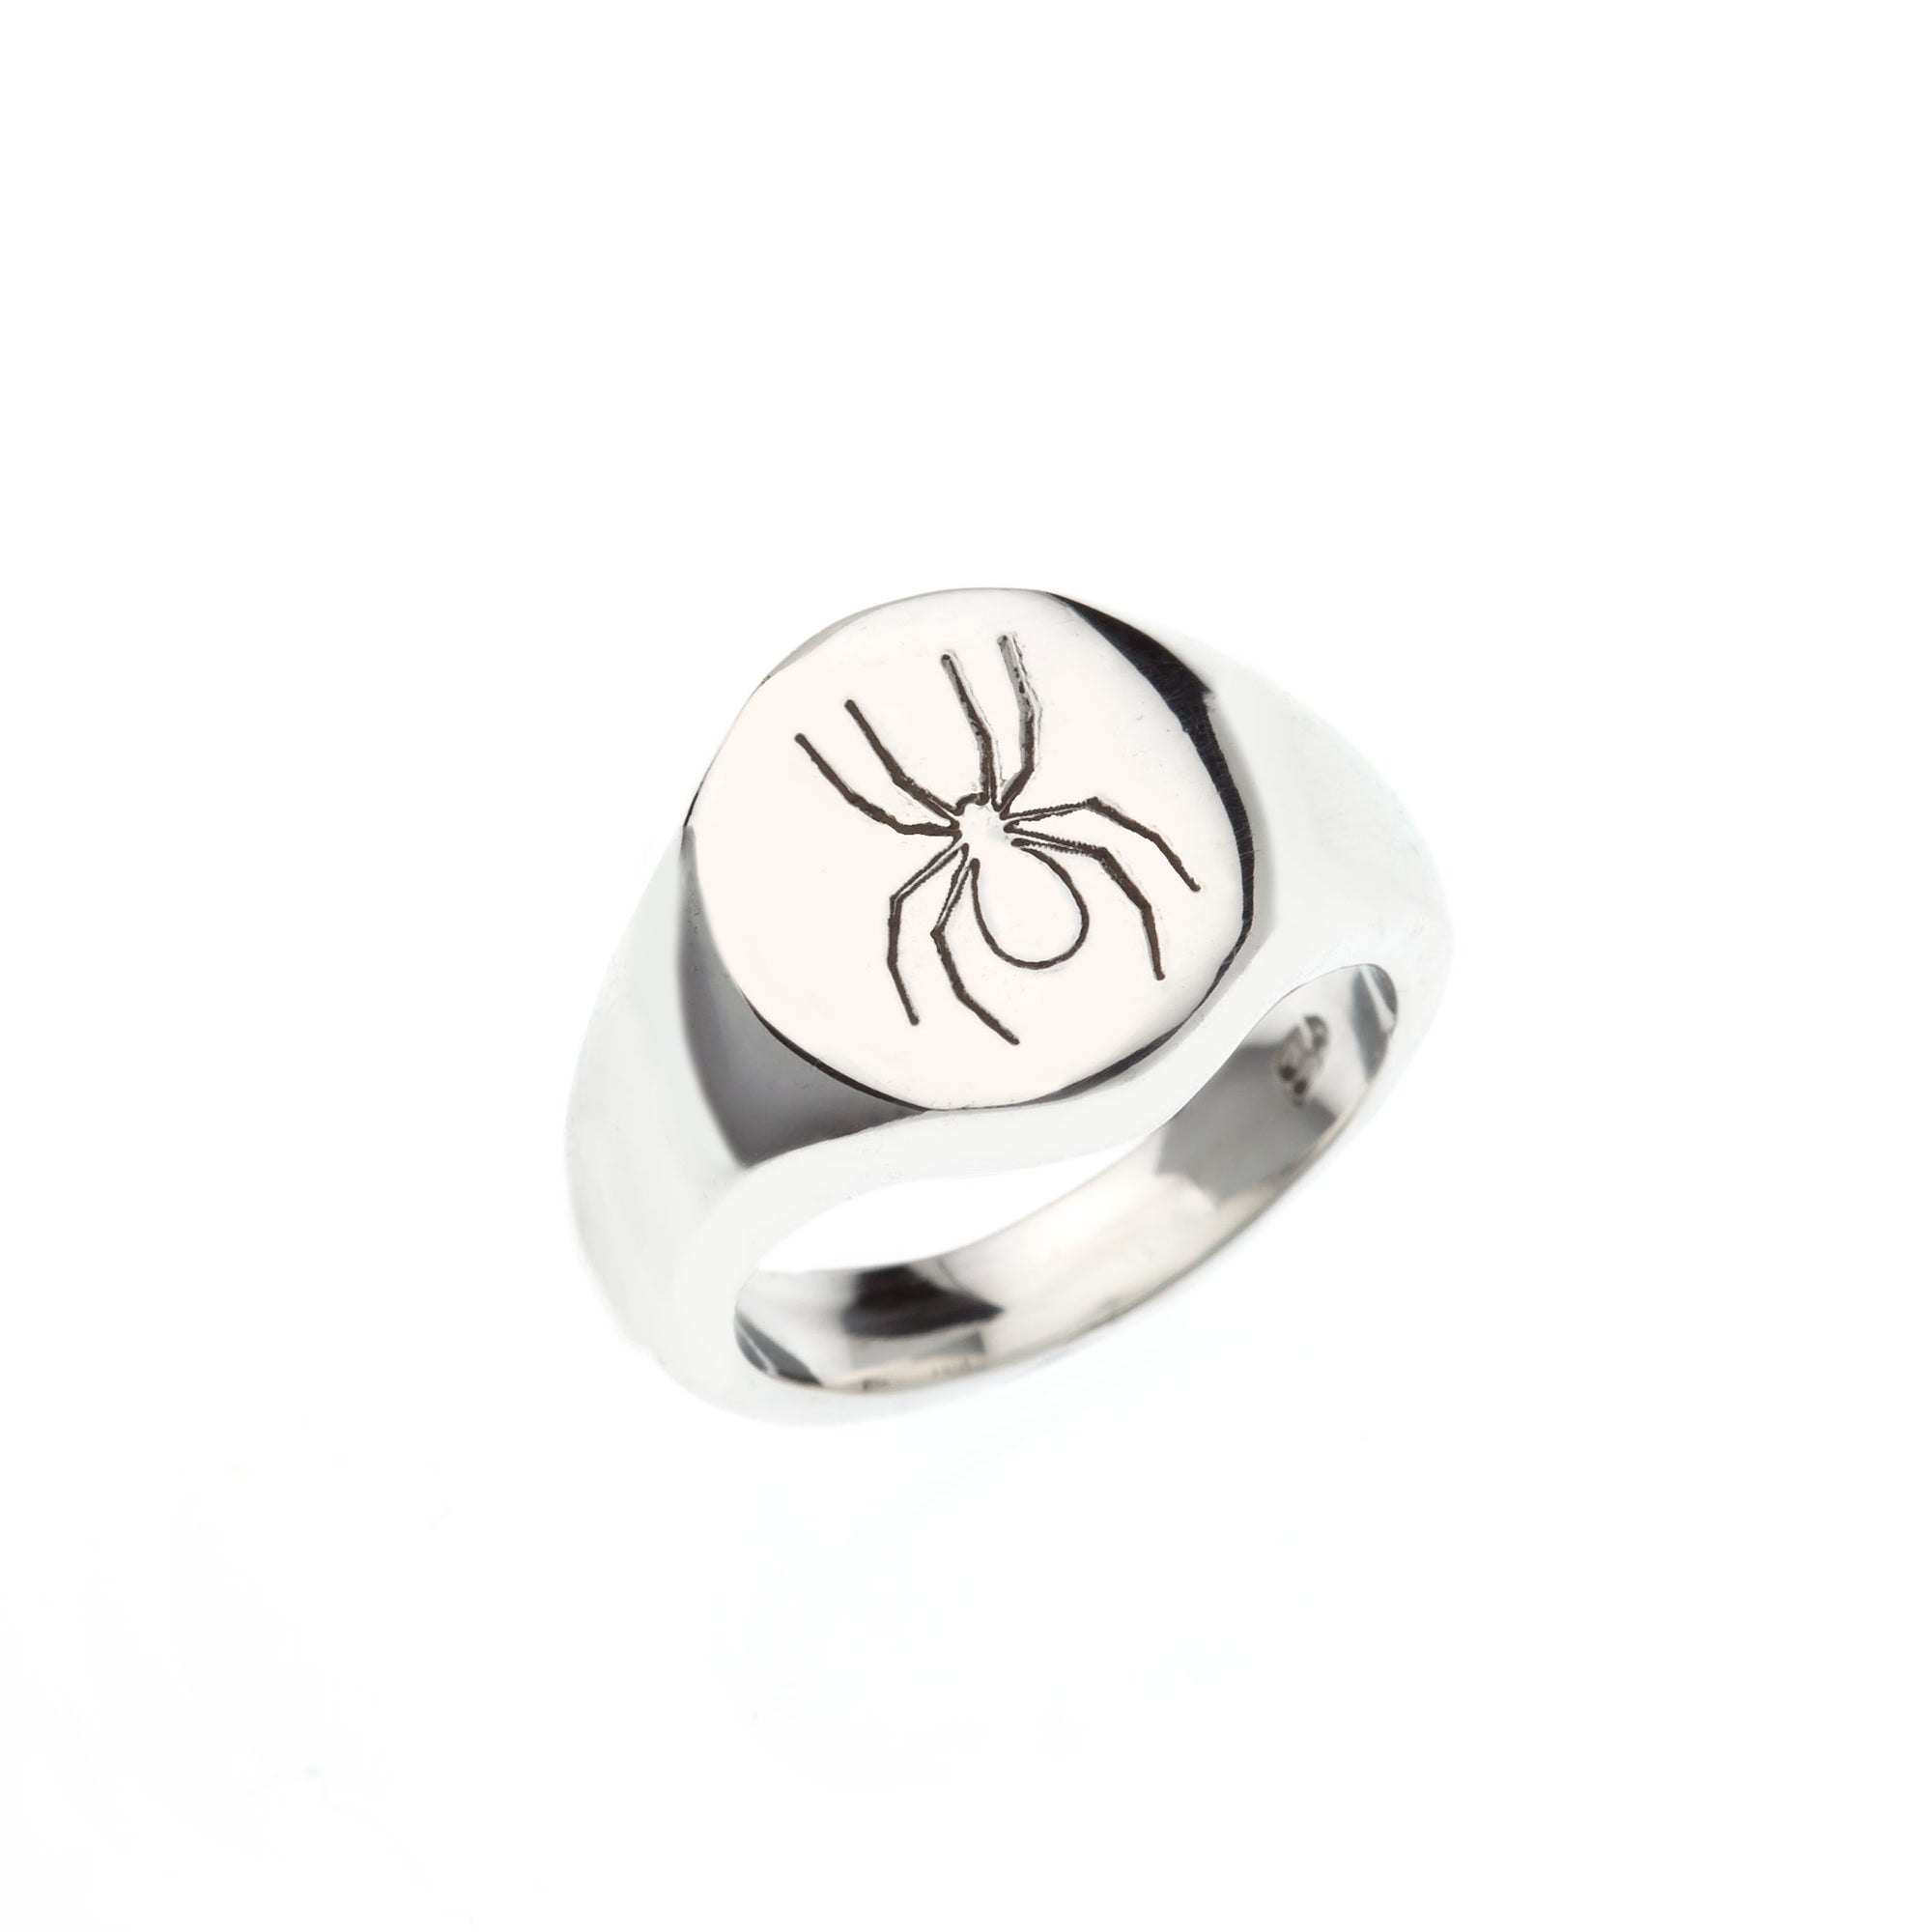 Oval silver signet ring with engraved spider symbol.